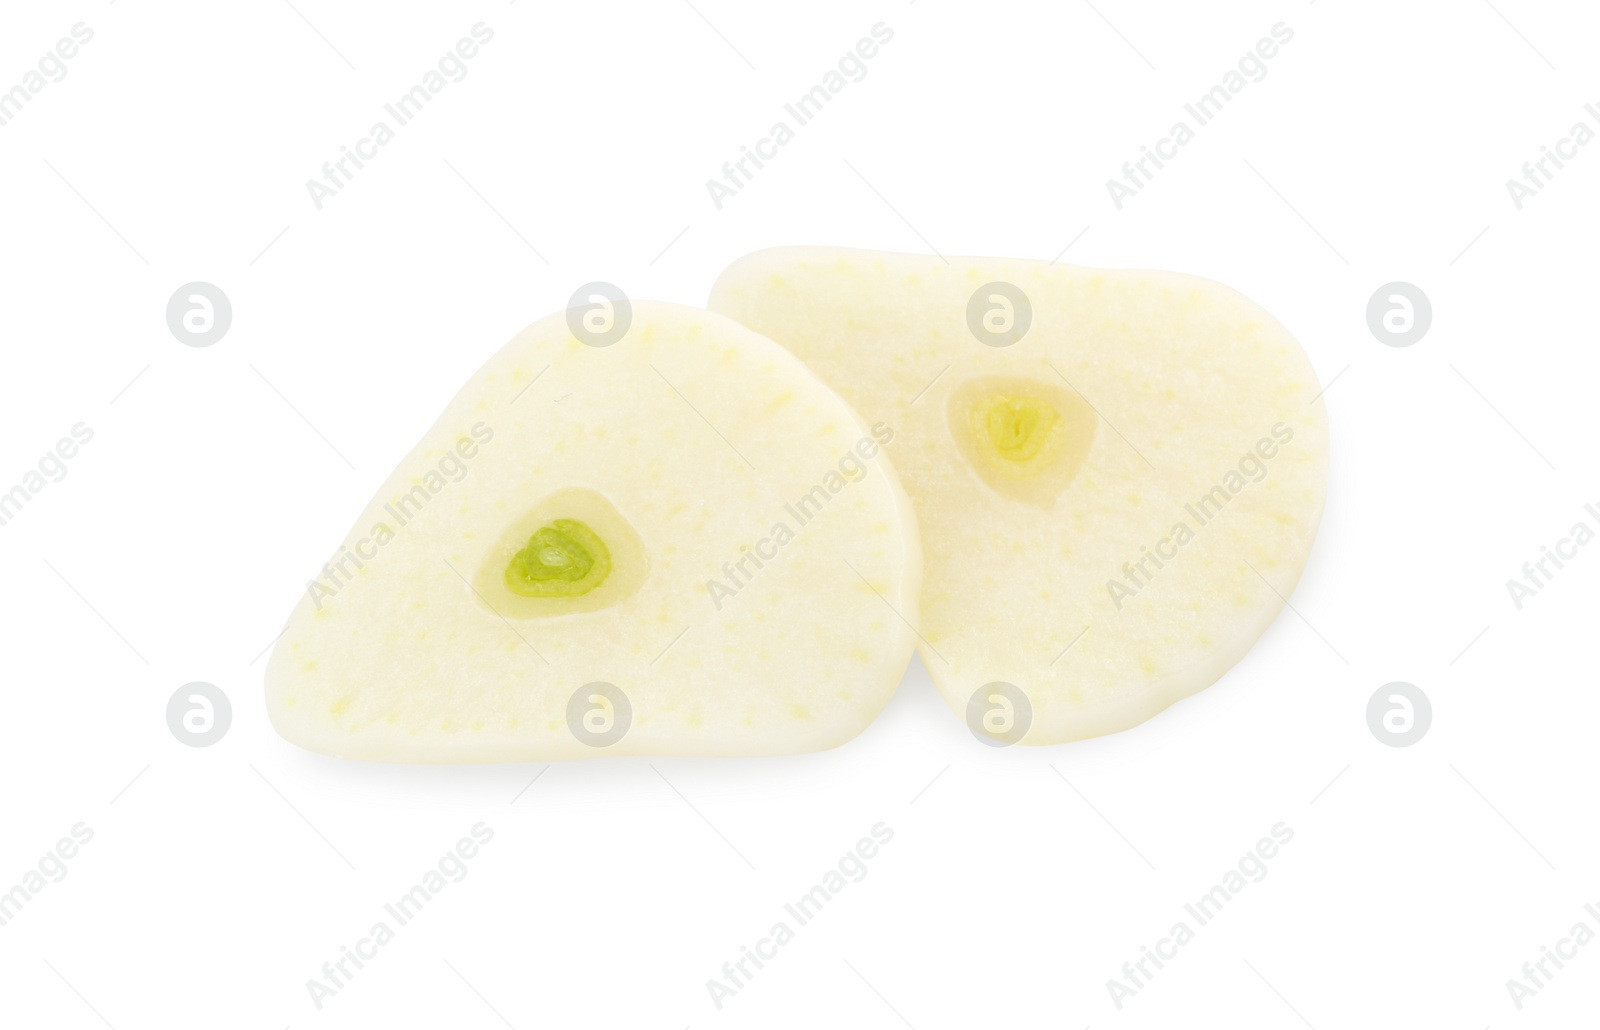 Photo of Pieces of fresh garlic isolated on white